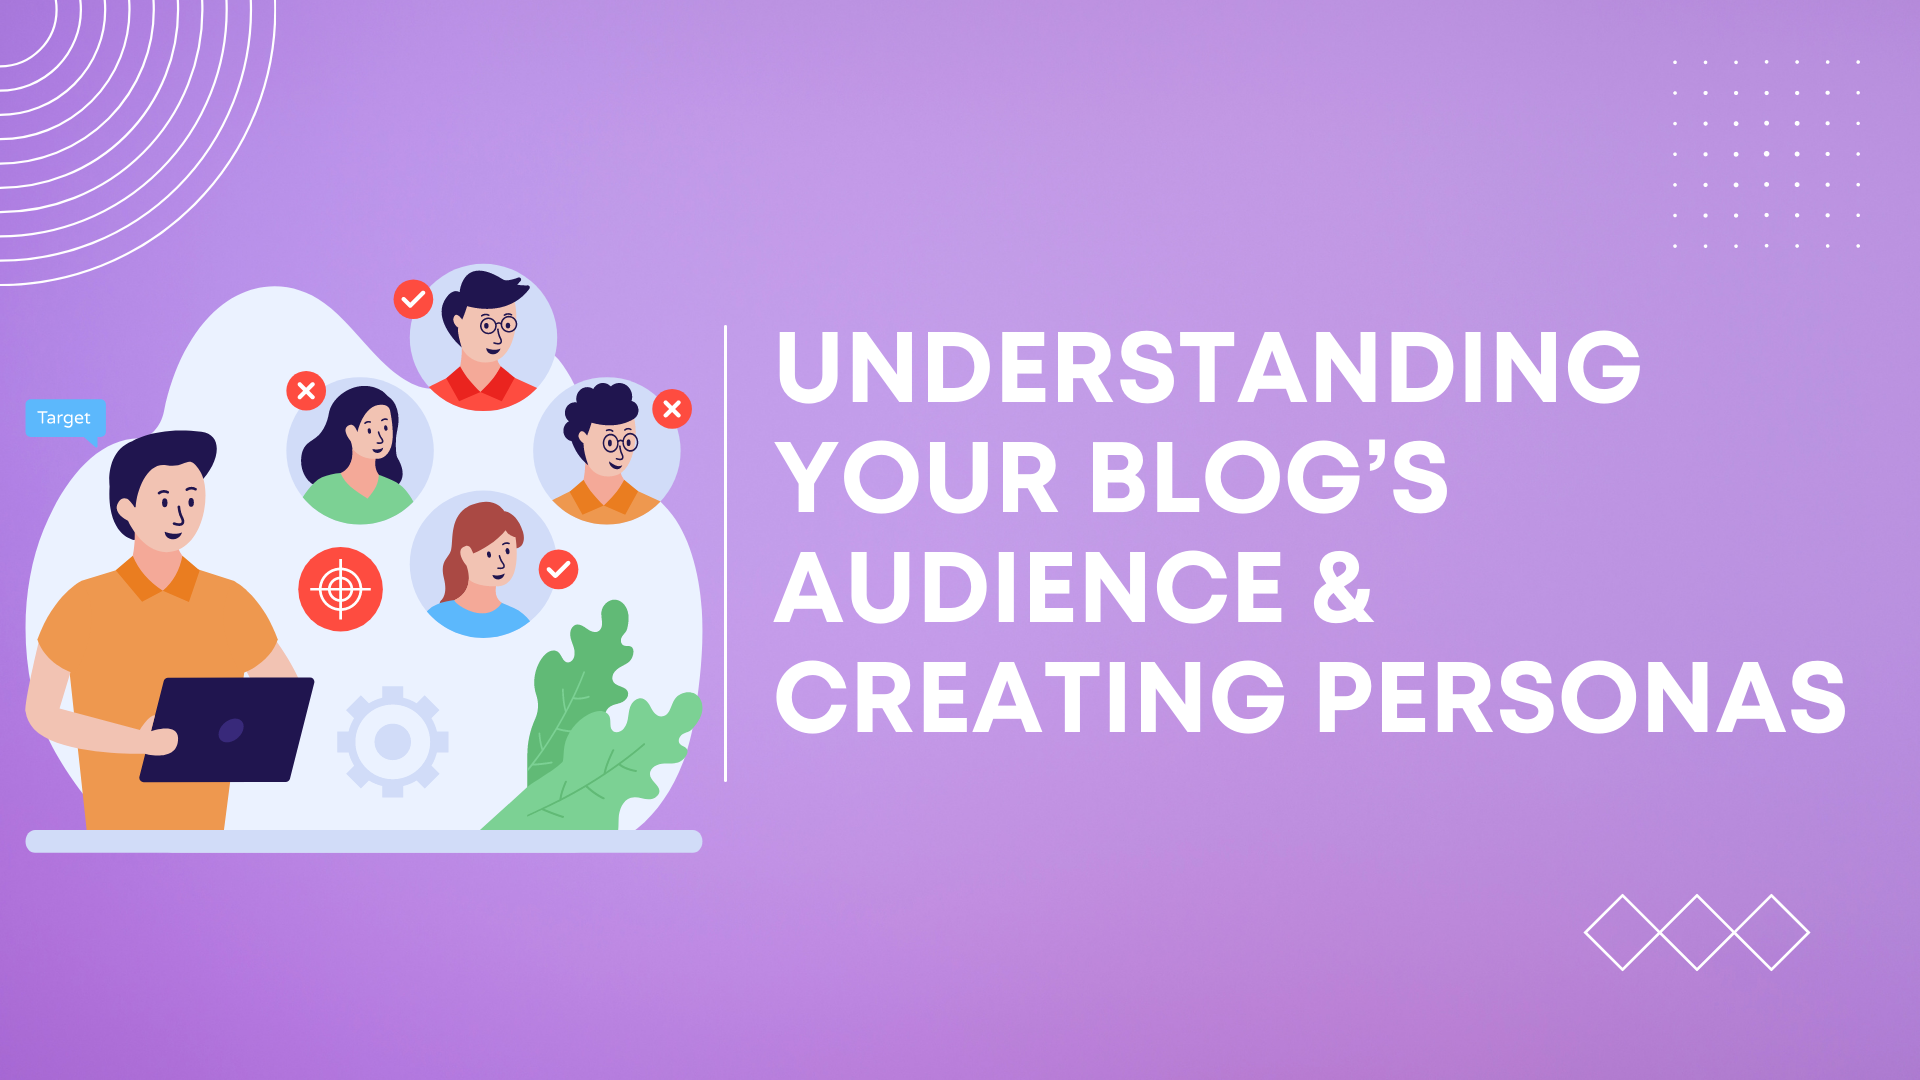 How to Set the Right Tone to Reach Your Audience